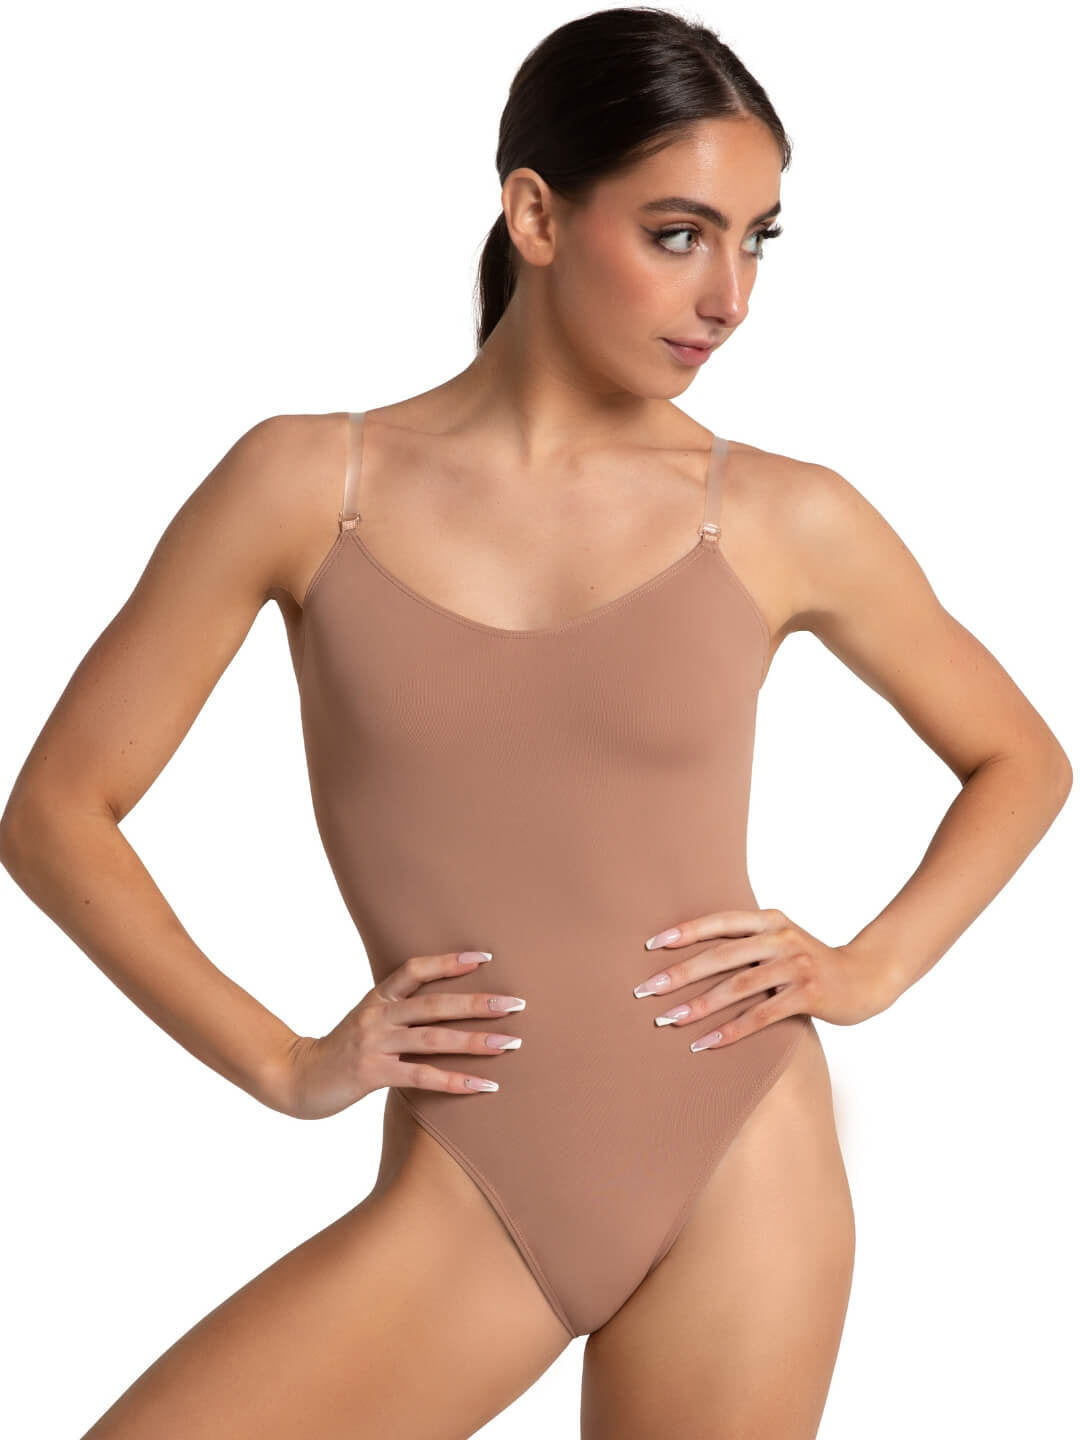 Camisole Leotard with Clear Transition Straps